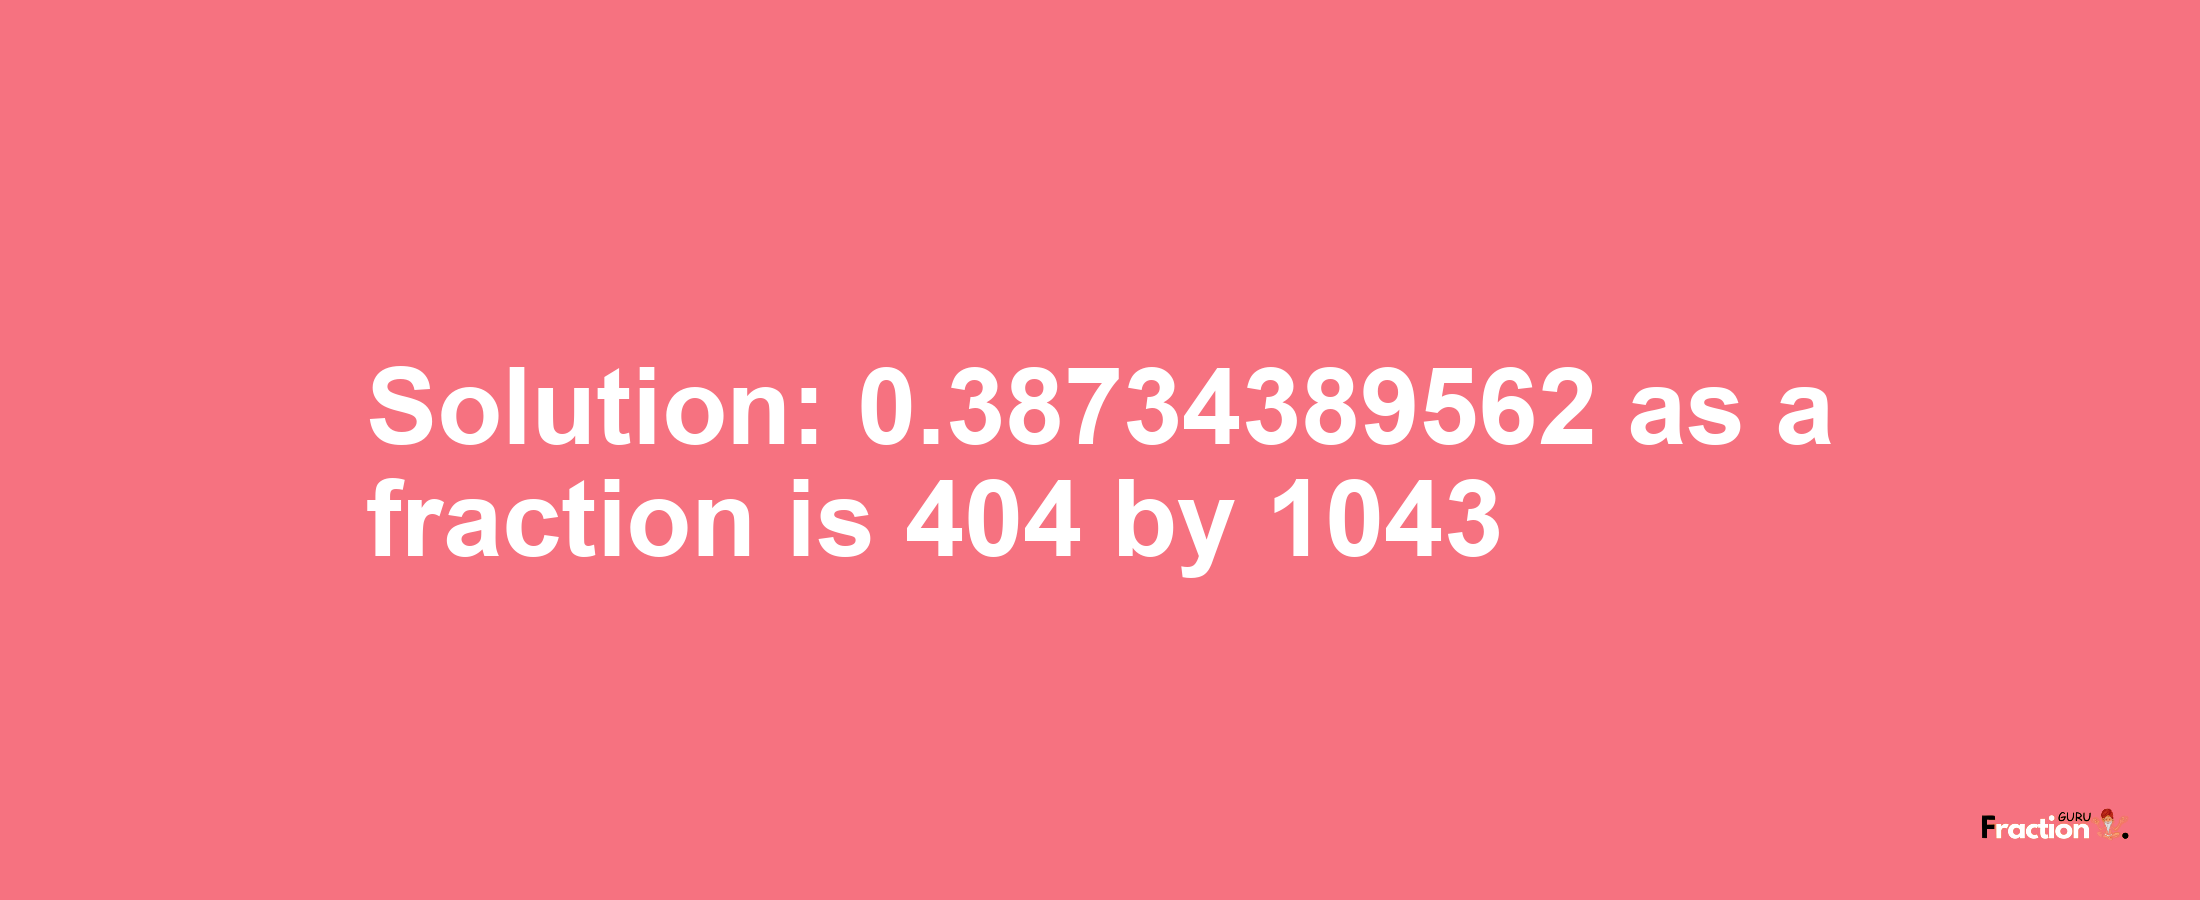 Solution:0.38734389562 as a fraction is 404/1043